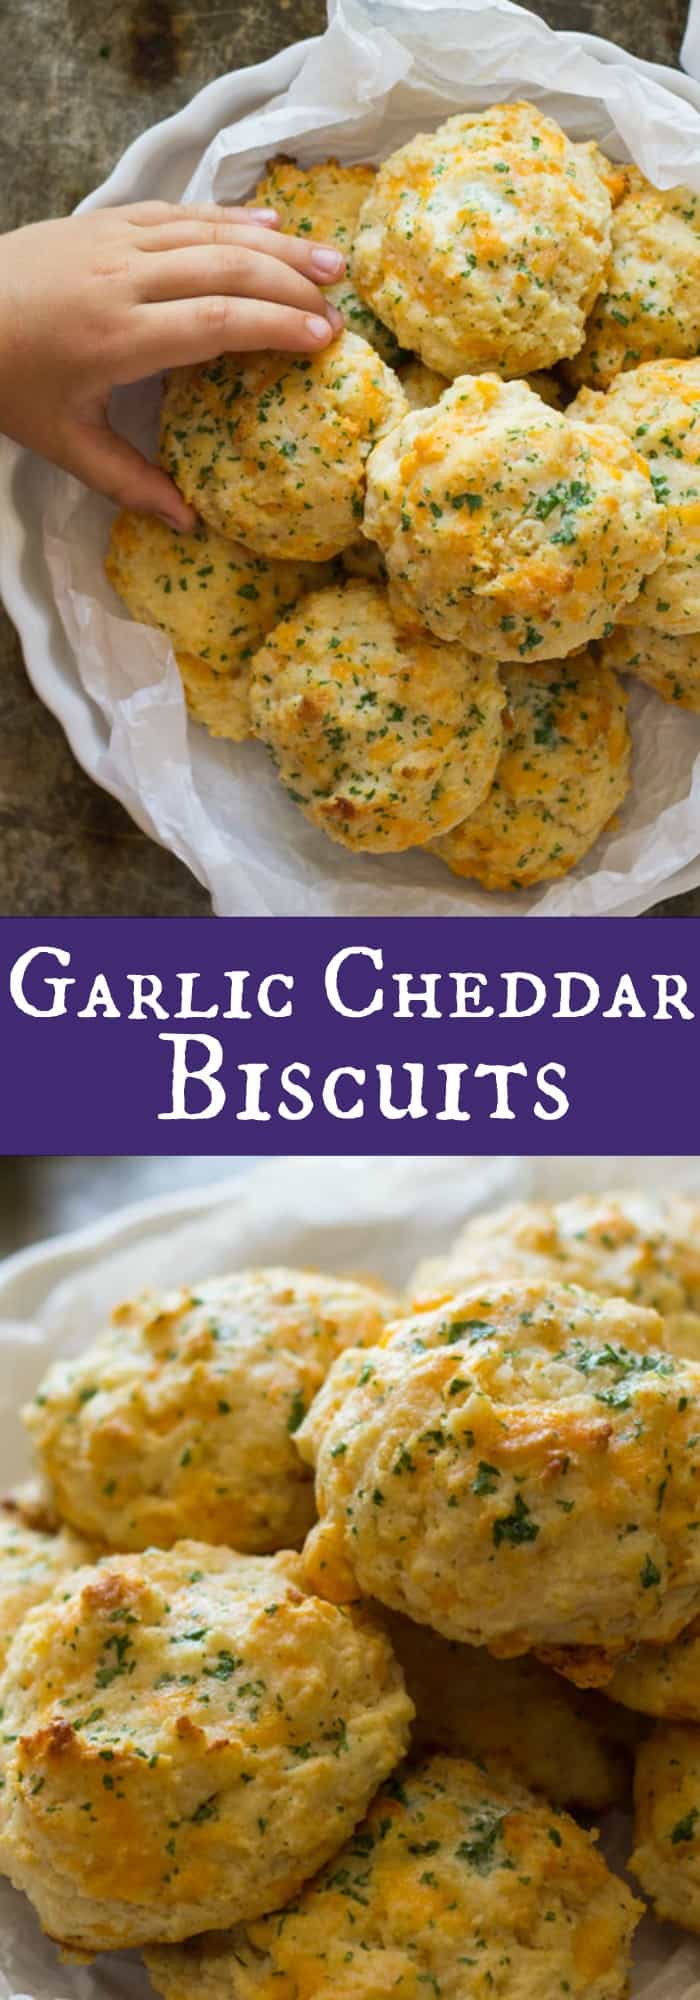 These Garlic Cheddar Biscuits are an easy and quick recipe plus they taste almost the same as Red Lobster's biscuits!!